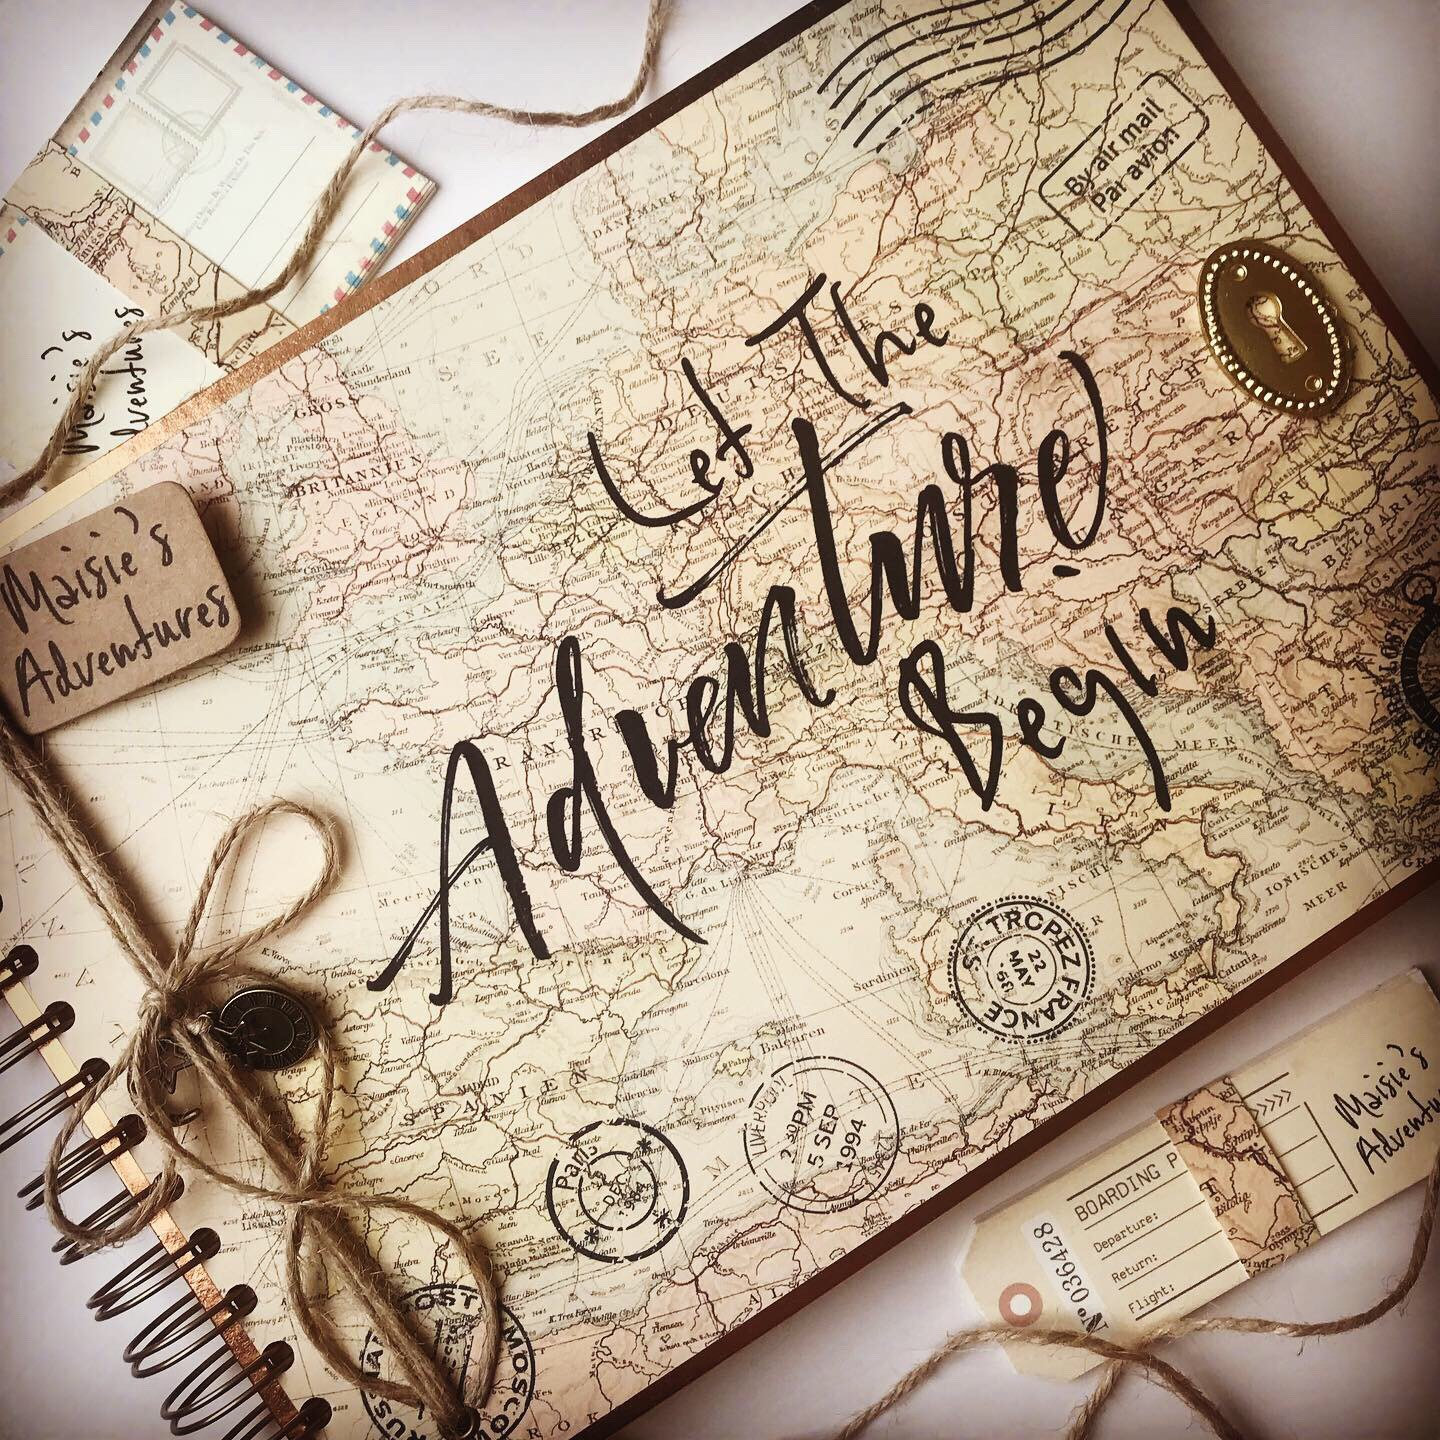 Our Adventure Book Photo Album Engraved Wood Cover, Photo